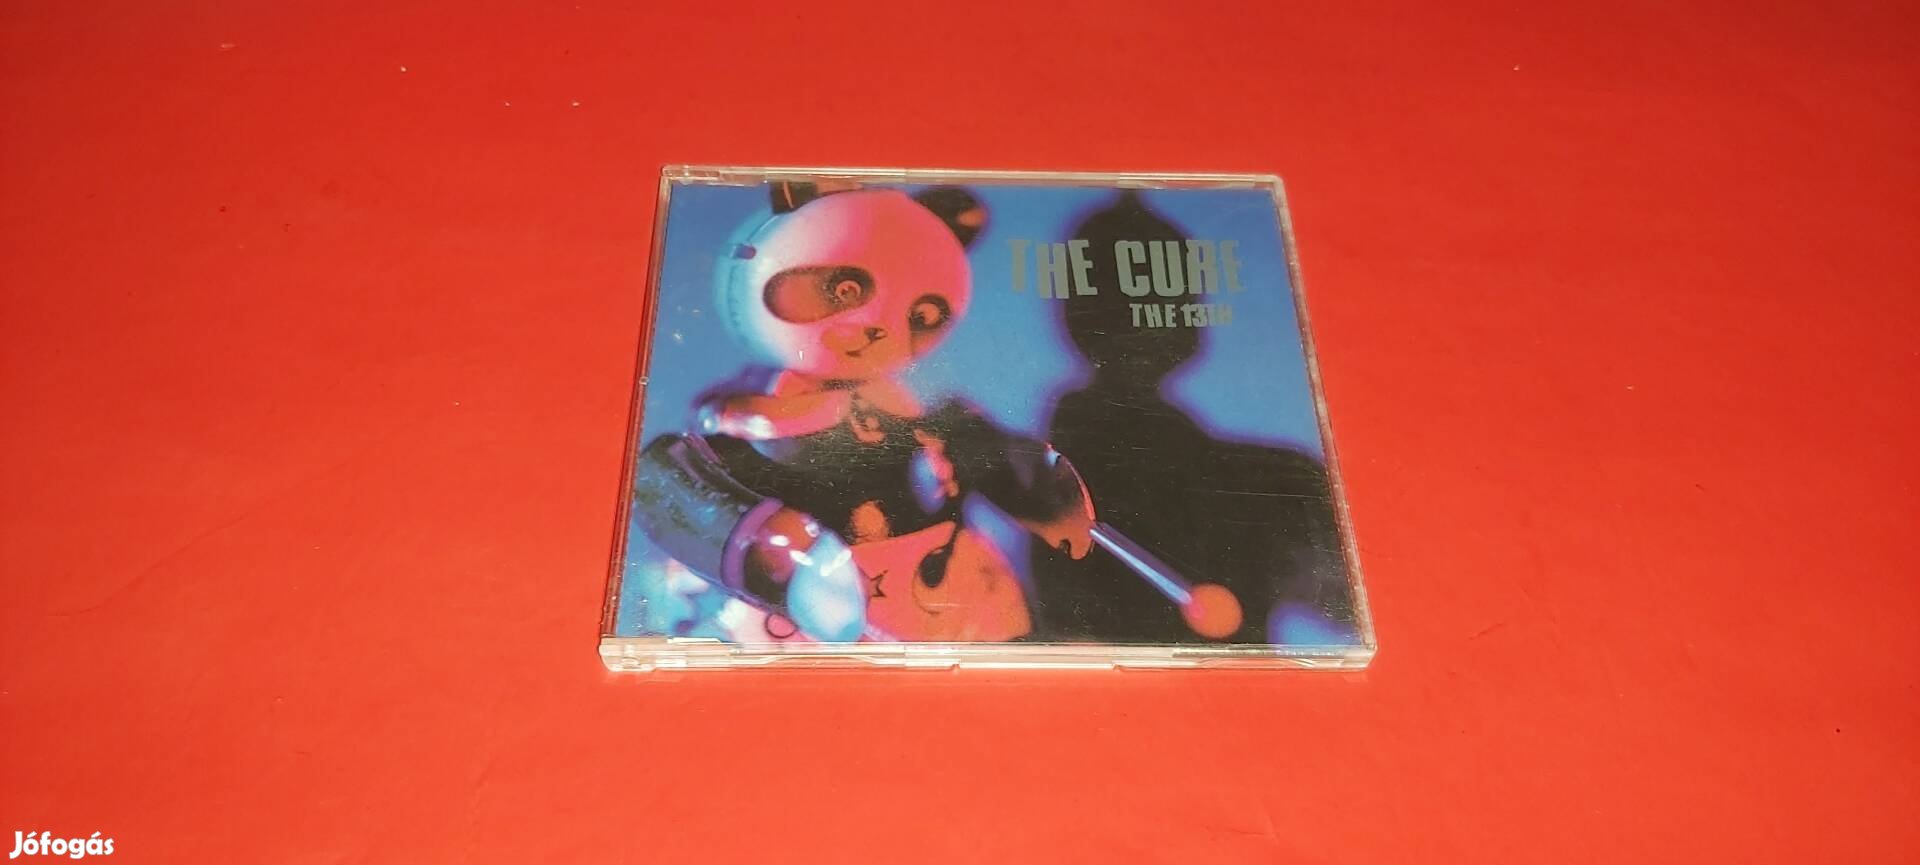 The Cure The 13th maxi Cd 1998